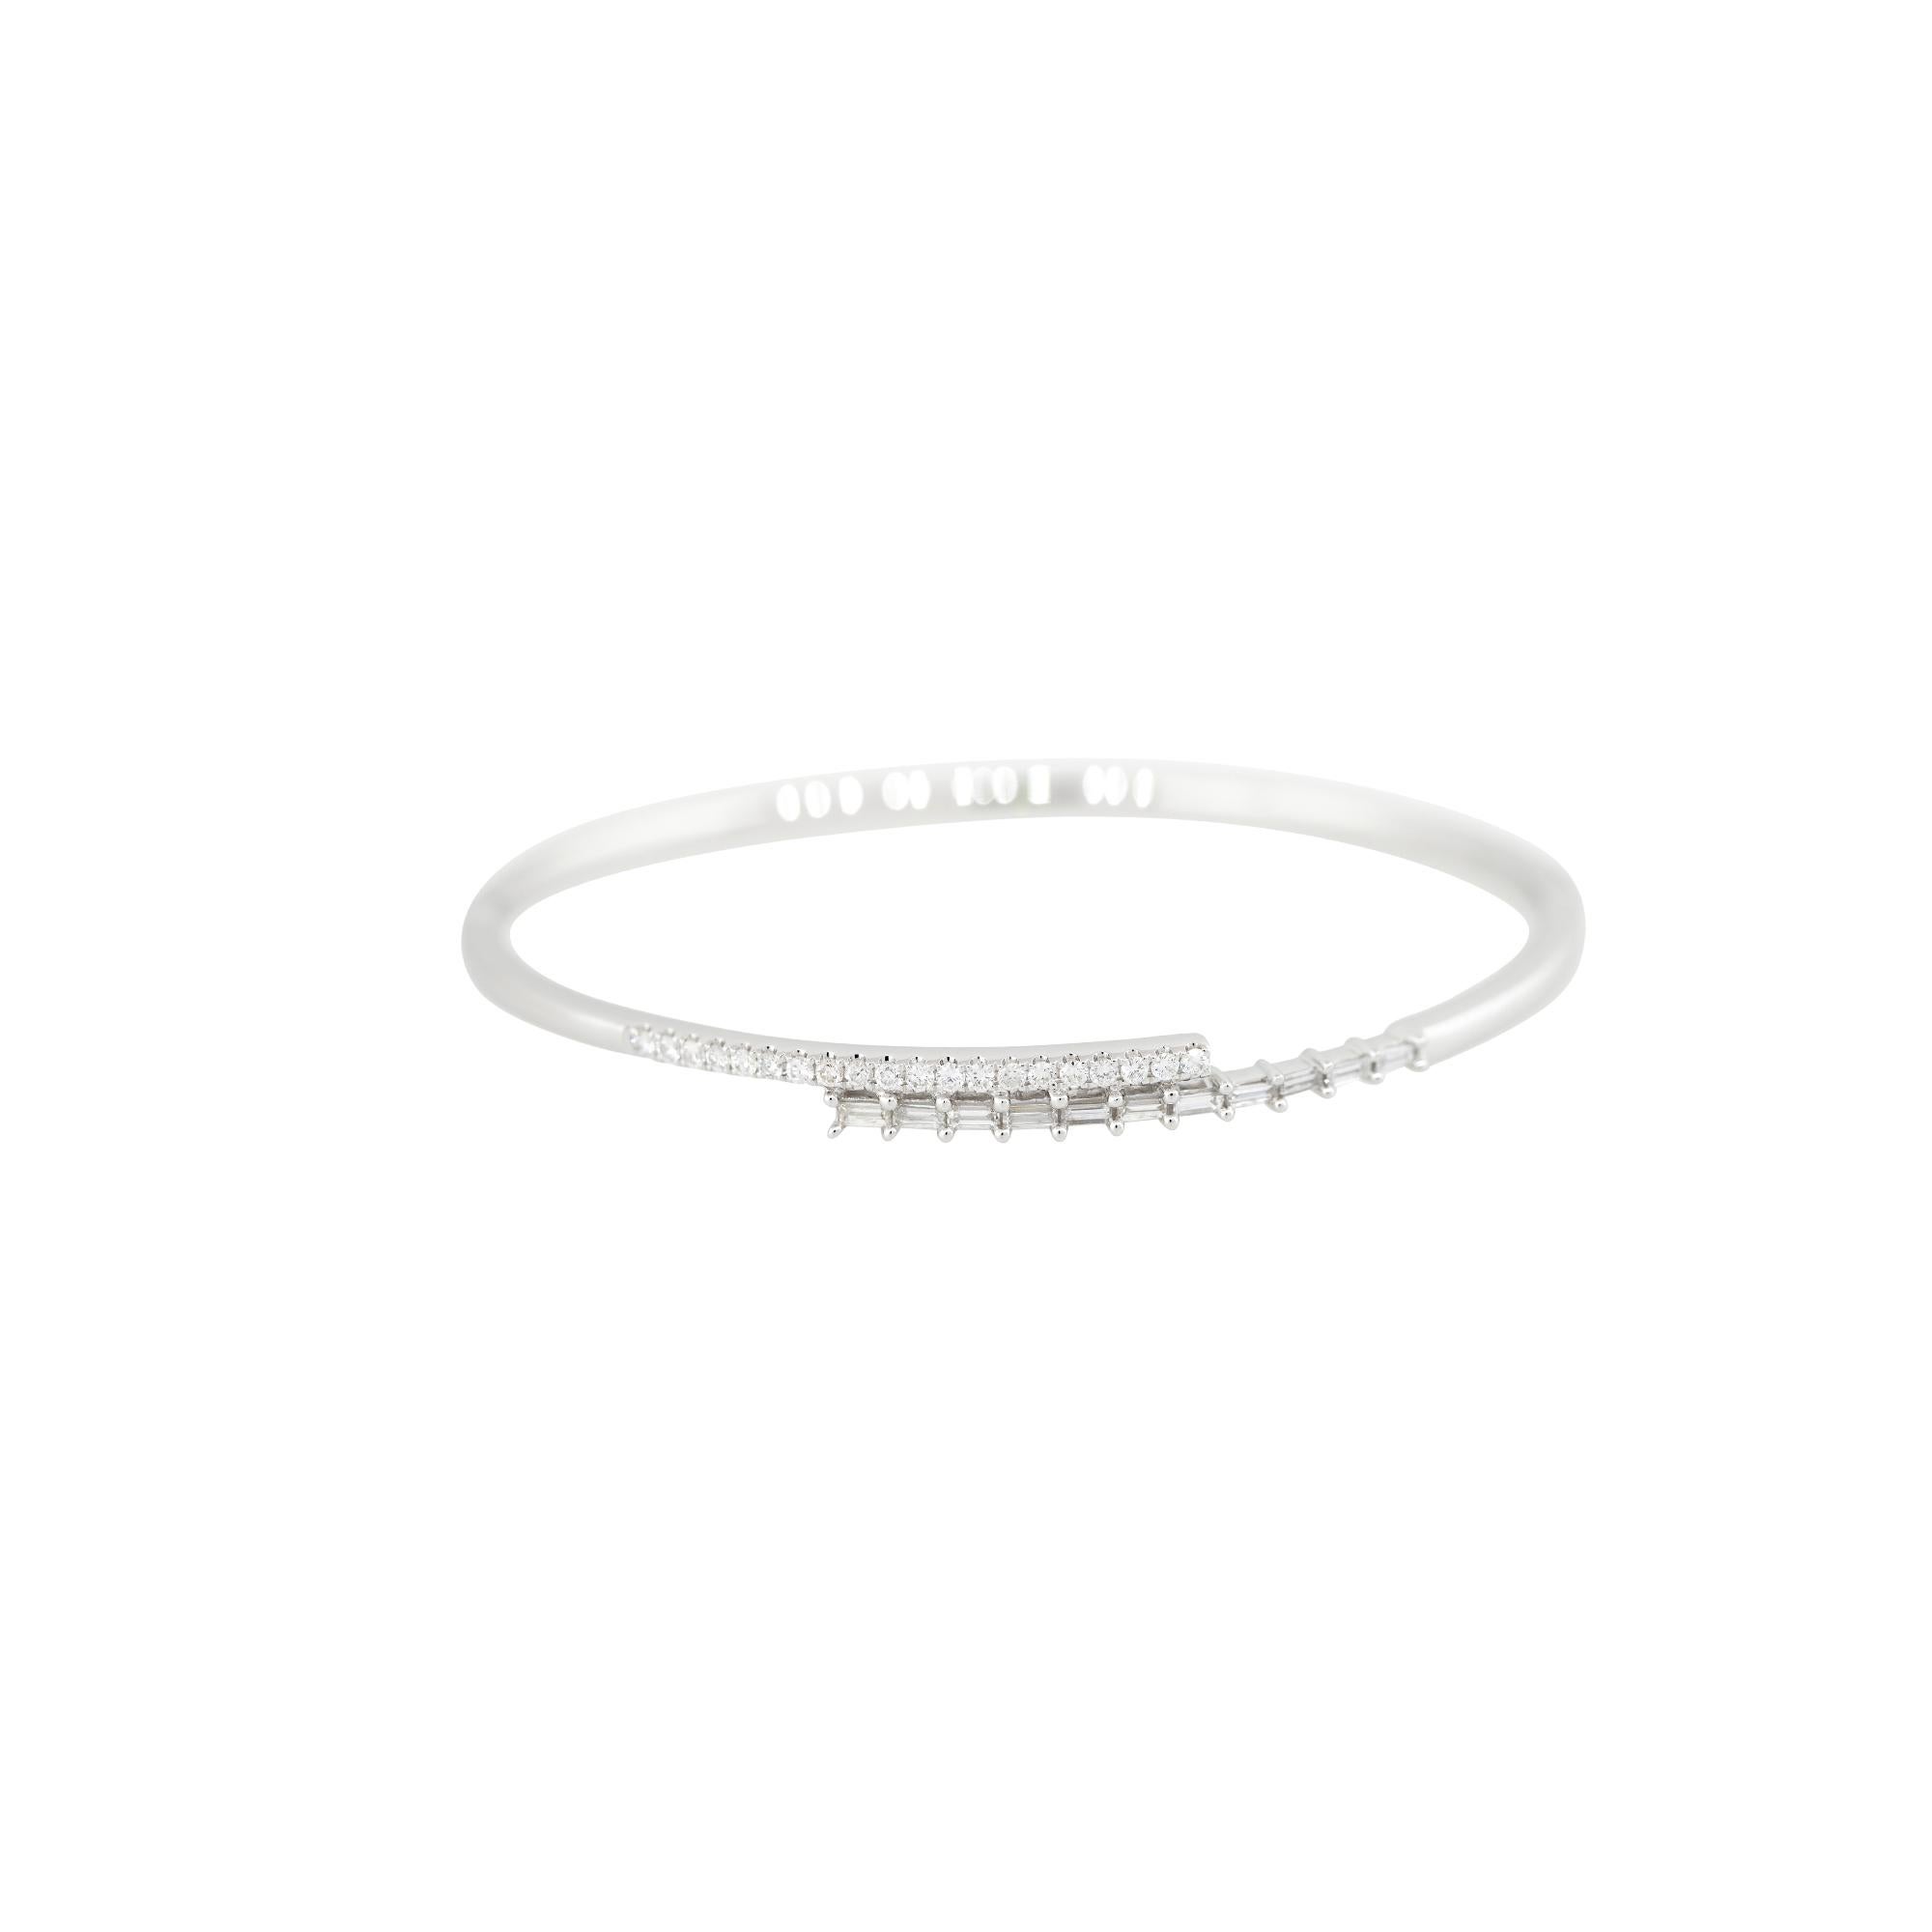 18k White Gold 0.70ctw Round and Baguette Cut Diamond Cuff Bangle
Material: 18k White Gold
Diamond Details: Approximately 0.70ctw of Round Brilliant and Baguette cut Diamonds. There is a row of round brilliant diamonds at one end of the bracelet and